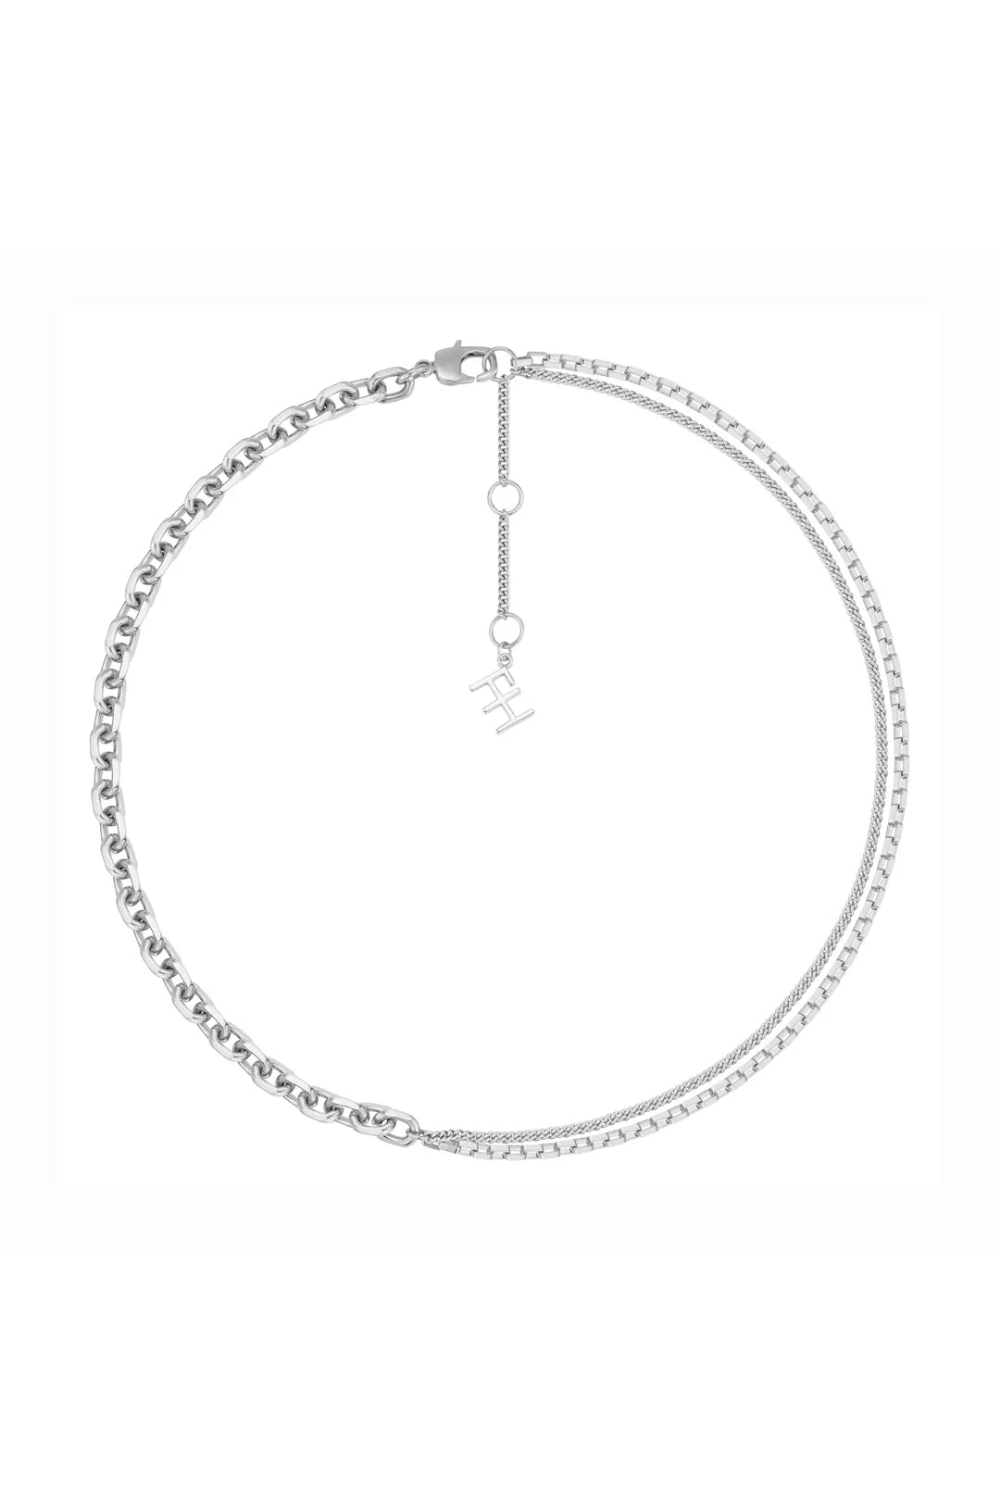 Emerge Multi Chain Necklace - Sterling Silver